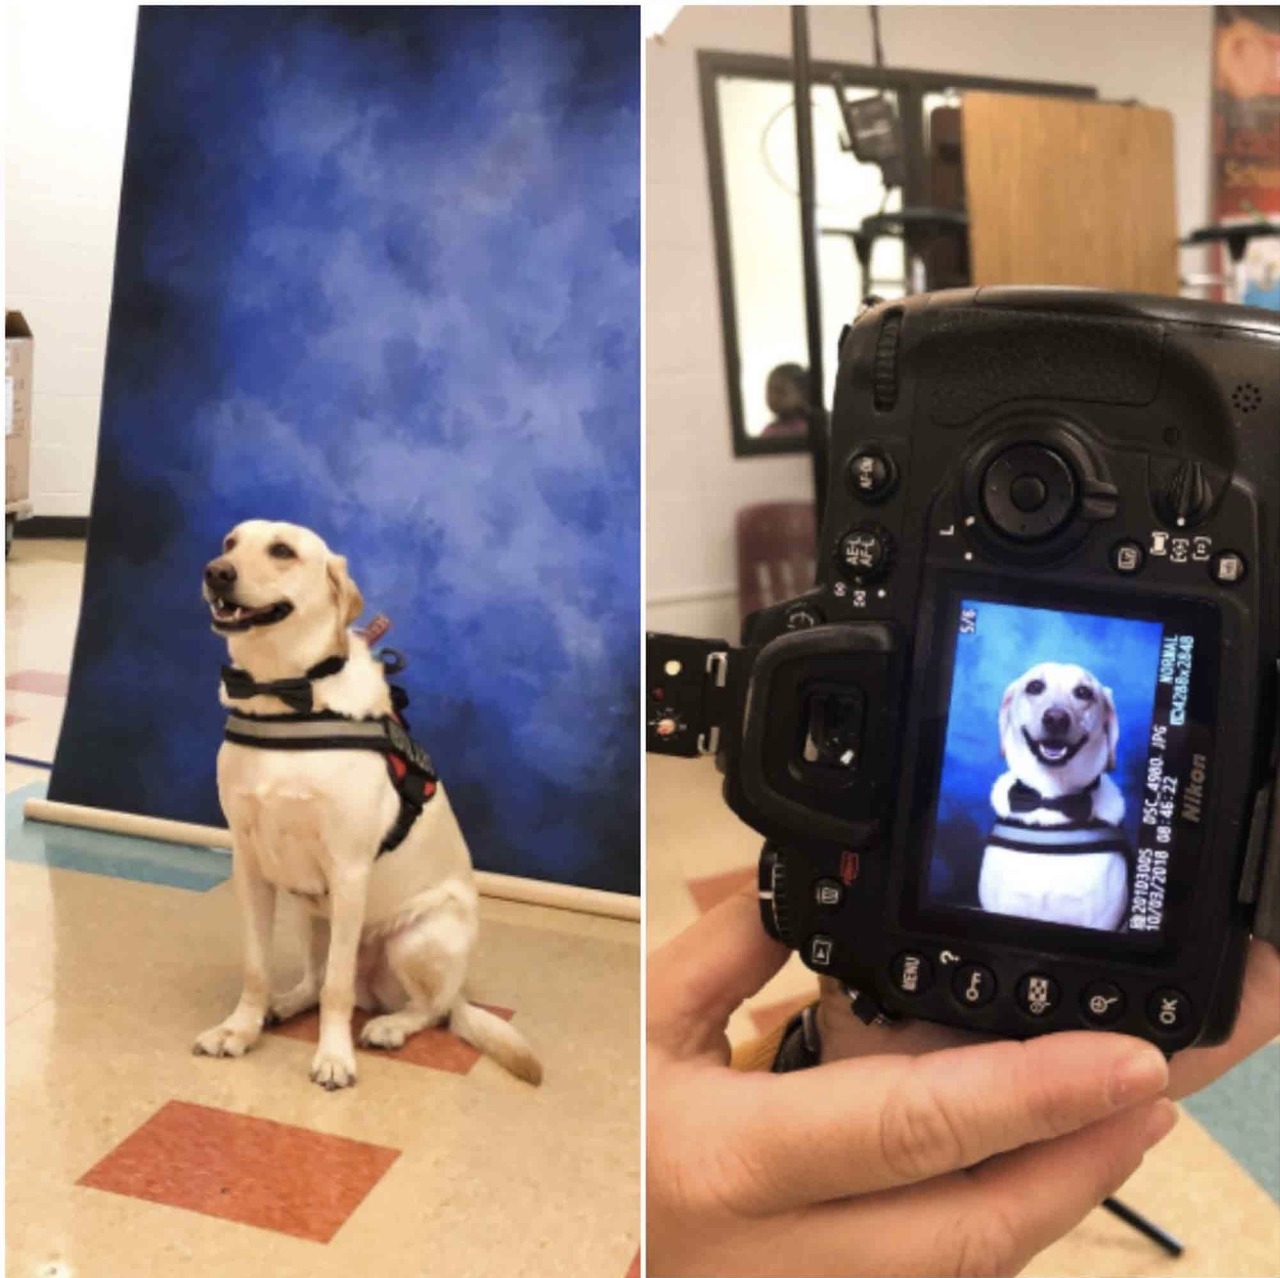 And Other Animals — Service dog poses for school picture (via)